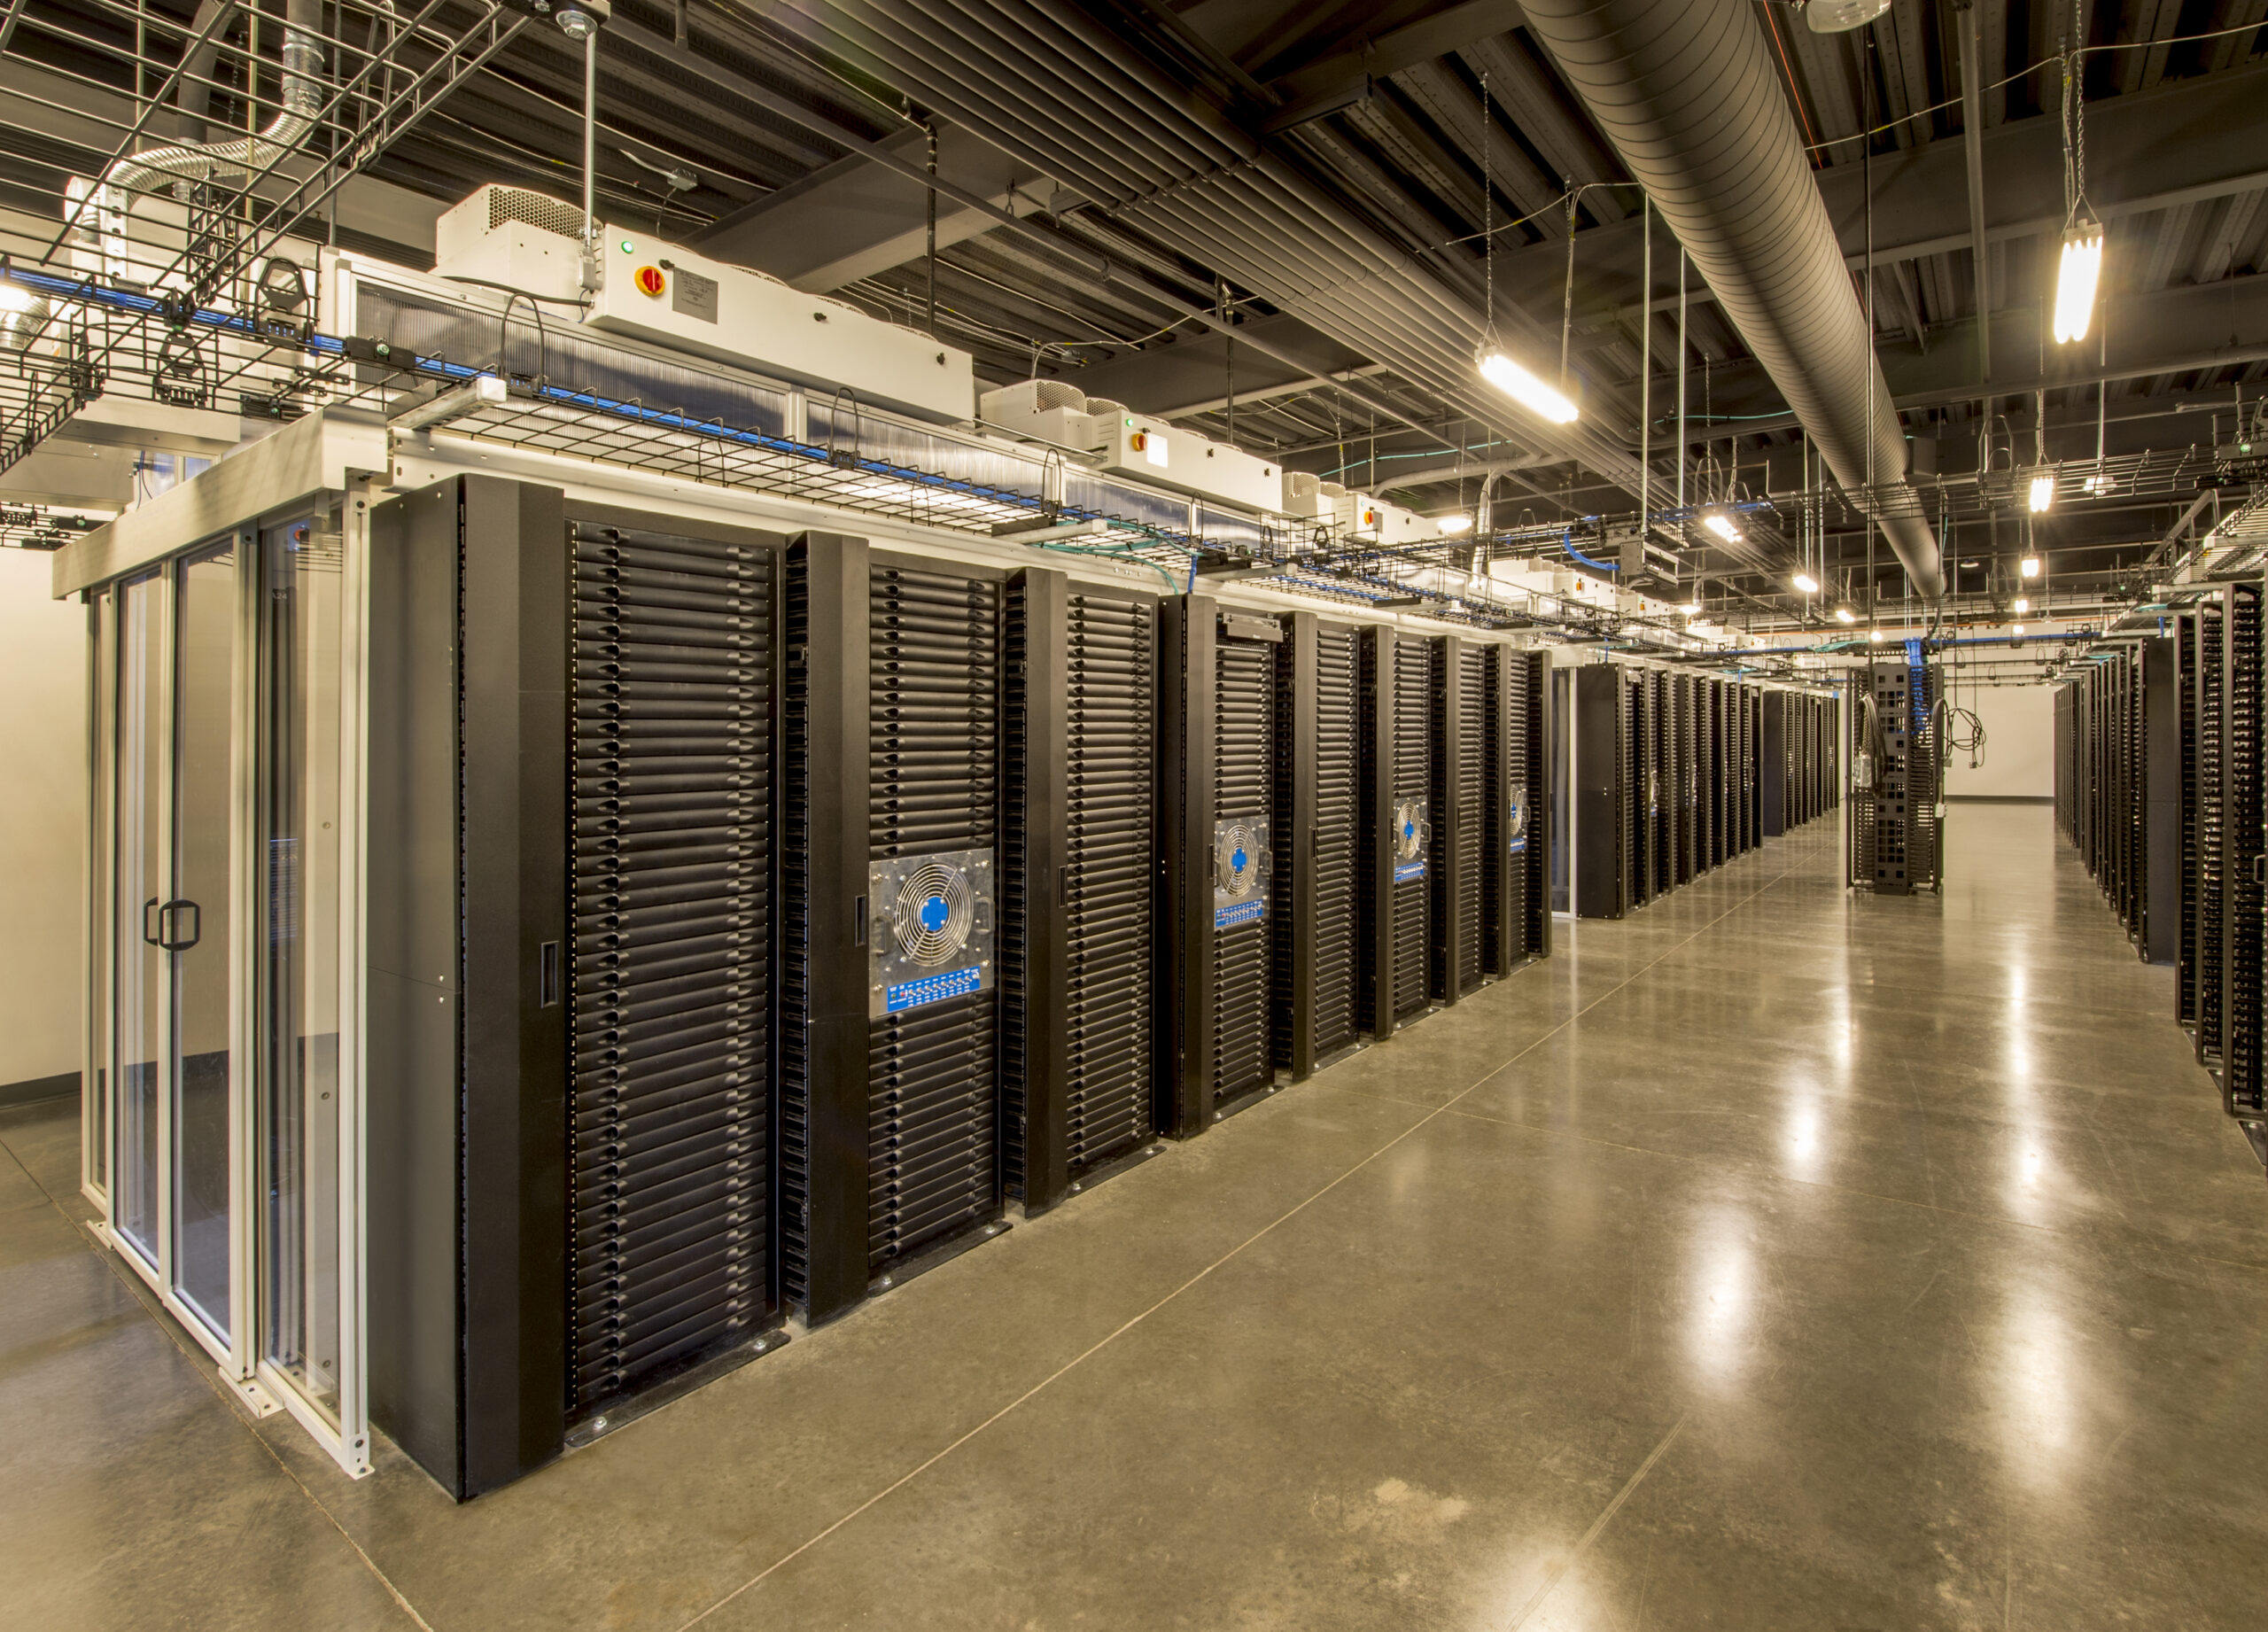 Featured image for “NITC Data Center”